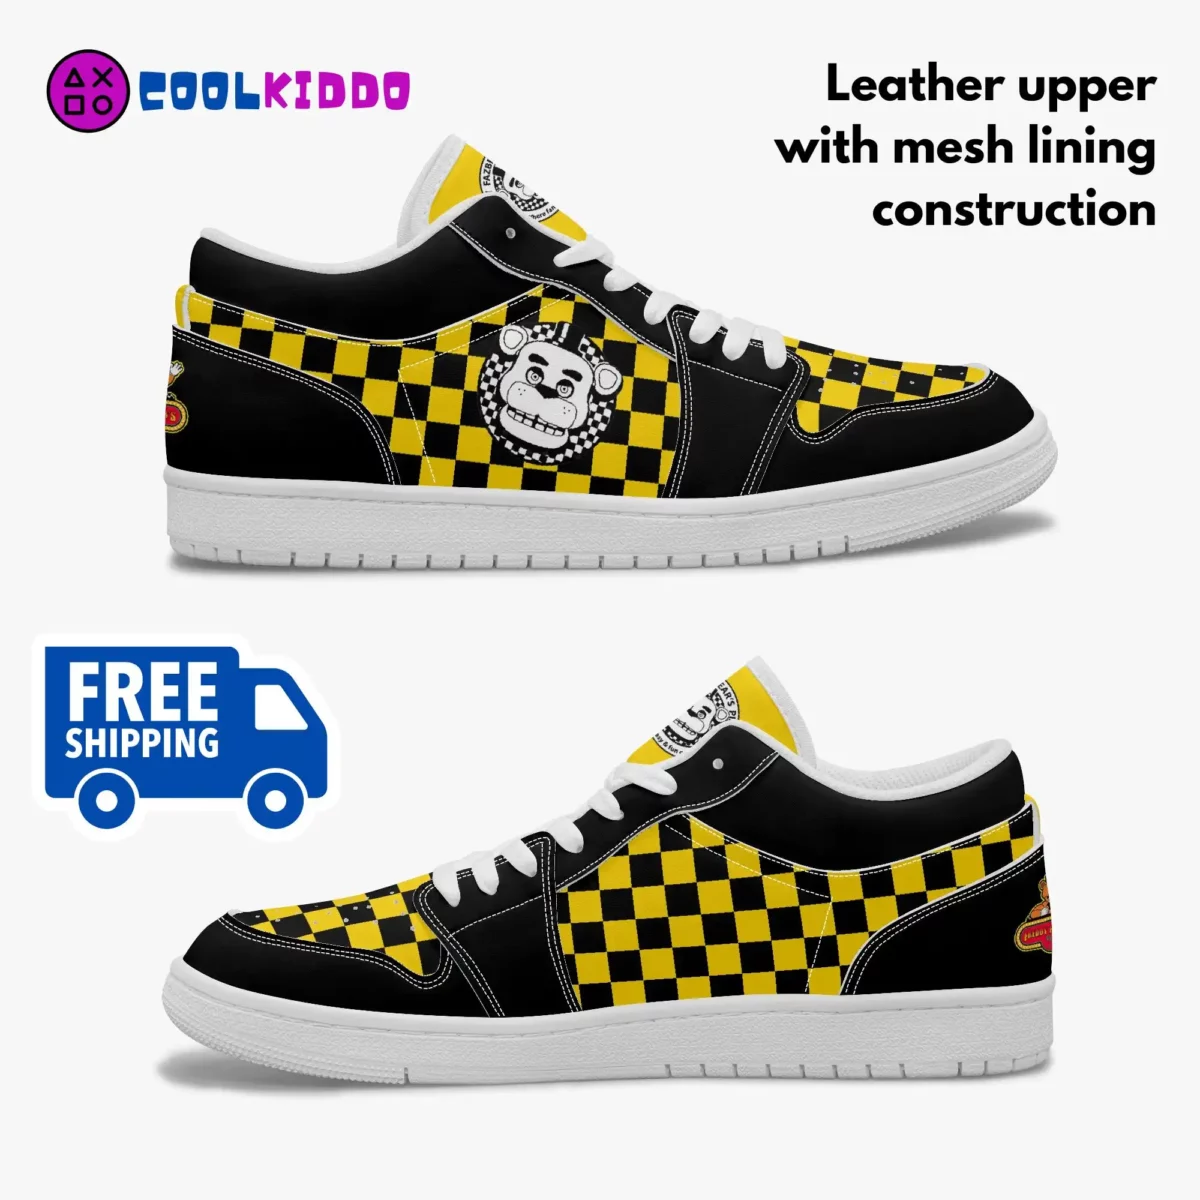 FNAF Five Nights at Freddy’s Video Game Shoes Inspired Low-Top Leather Sneakers for youth / adults Cool Kiddo 14